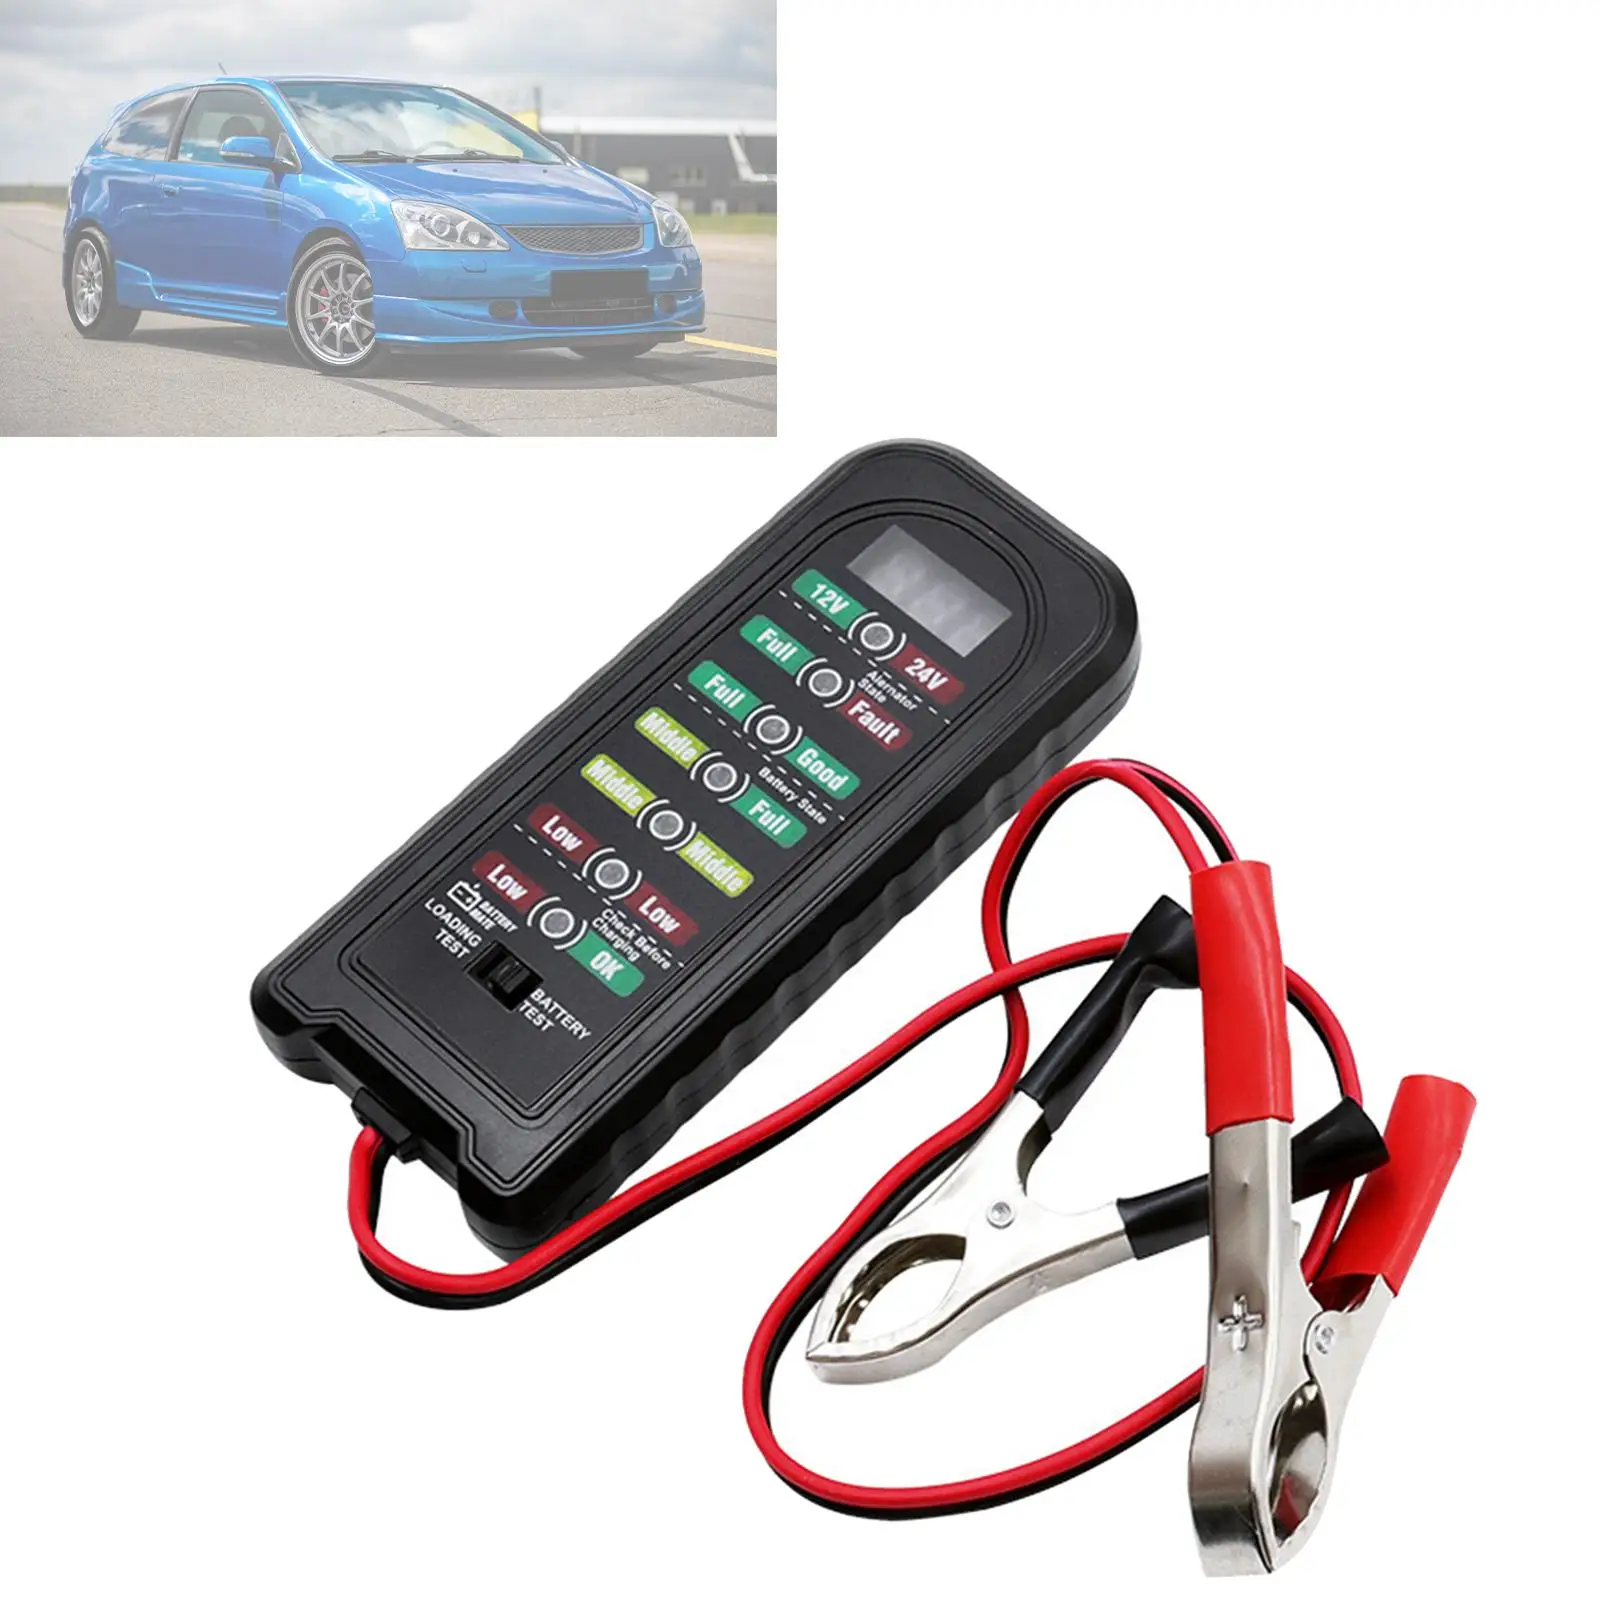 Car Battery Tester Auto Cranking and Charging System Test 12V 24V Automotive Load Tester Indicator Auto Tester Tool Premium